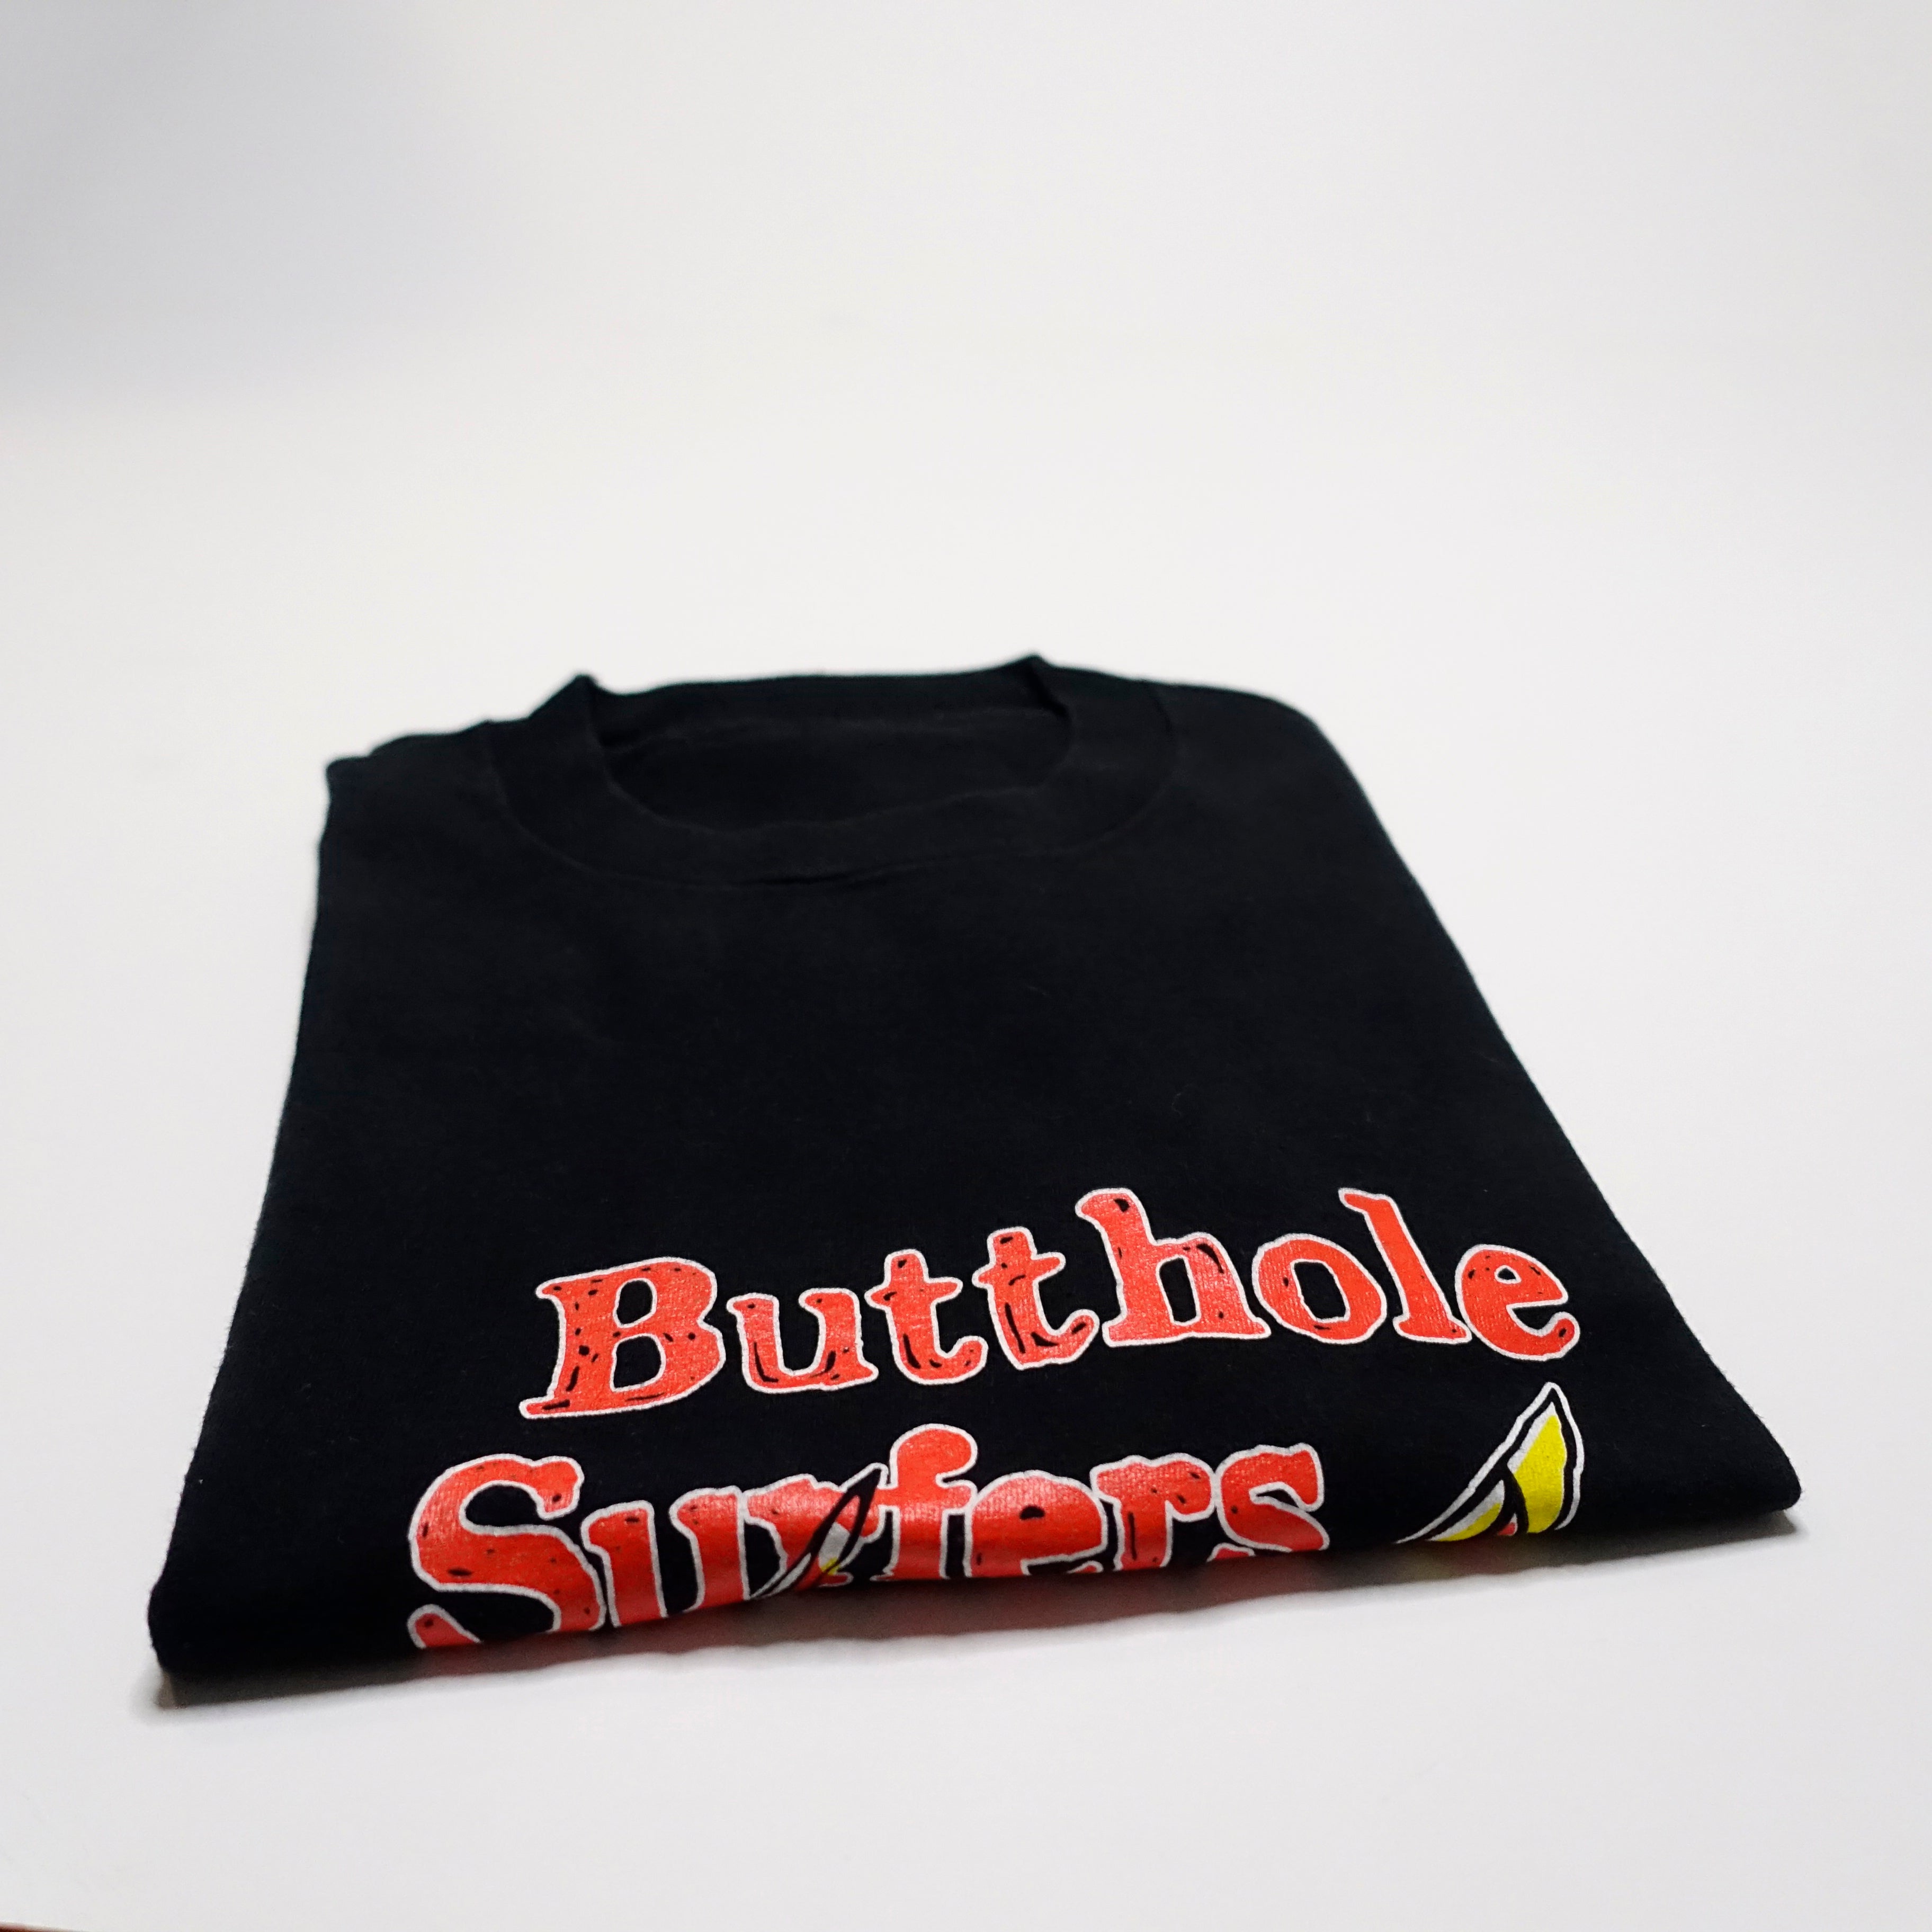 Butthole Surfers - The Hole Truth And Nothing Butt Tour Shirt Size XL